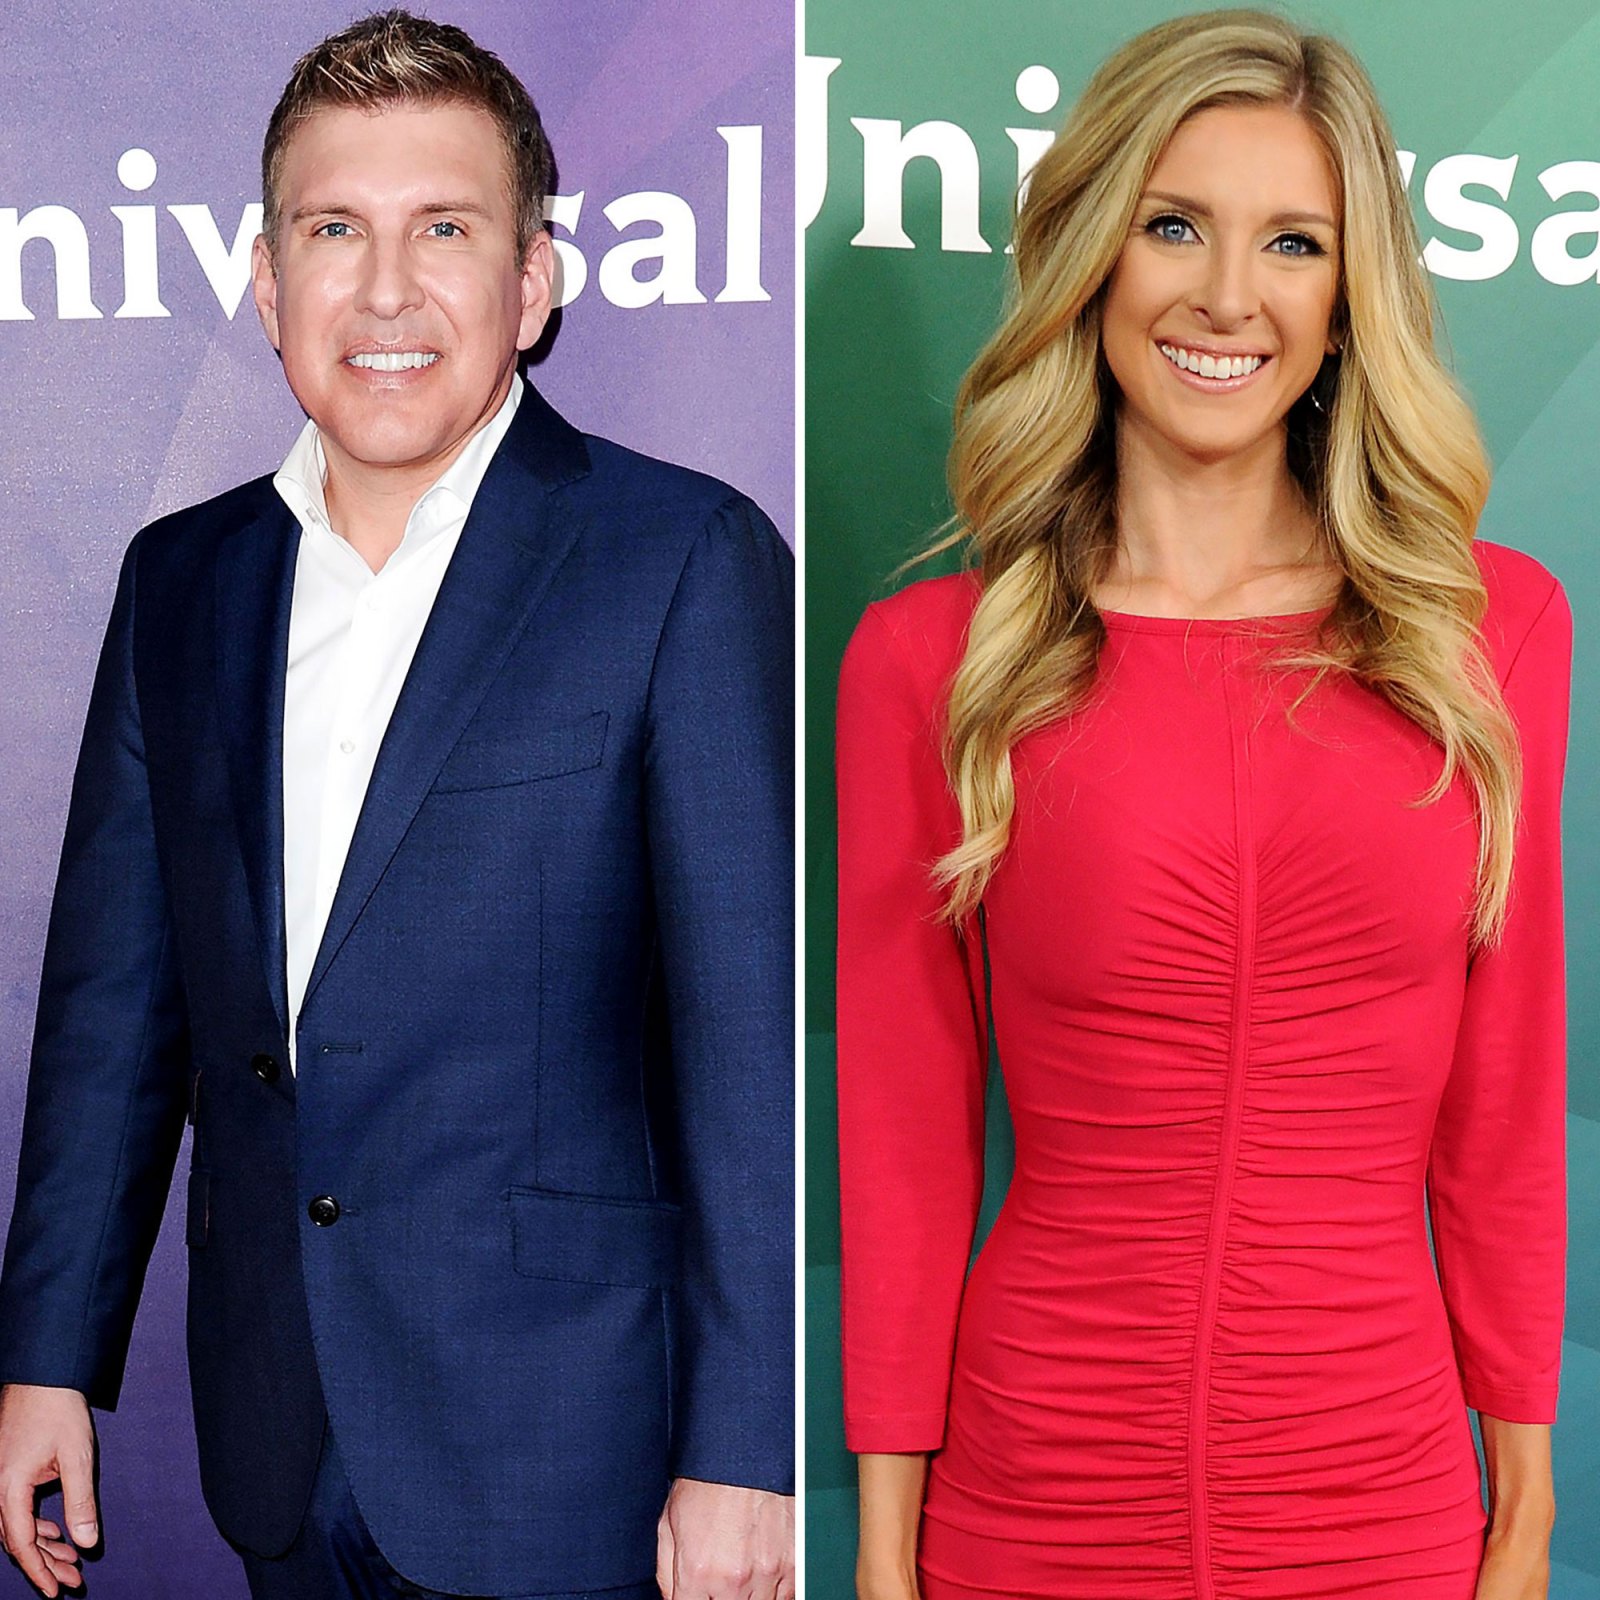 Todd Chrisley Wishes Daughter Lindsie ‘Nothing But the Best’ Amid ‘Uneasiness’